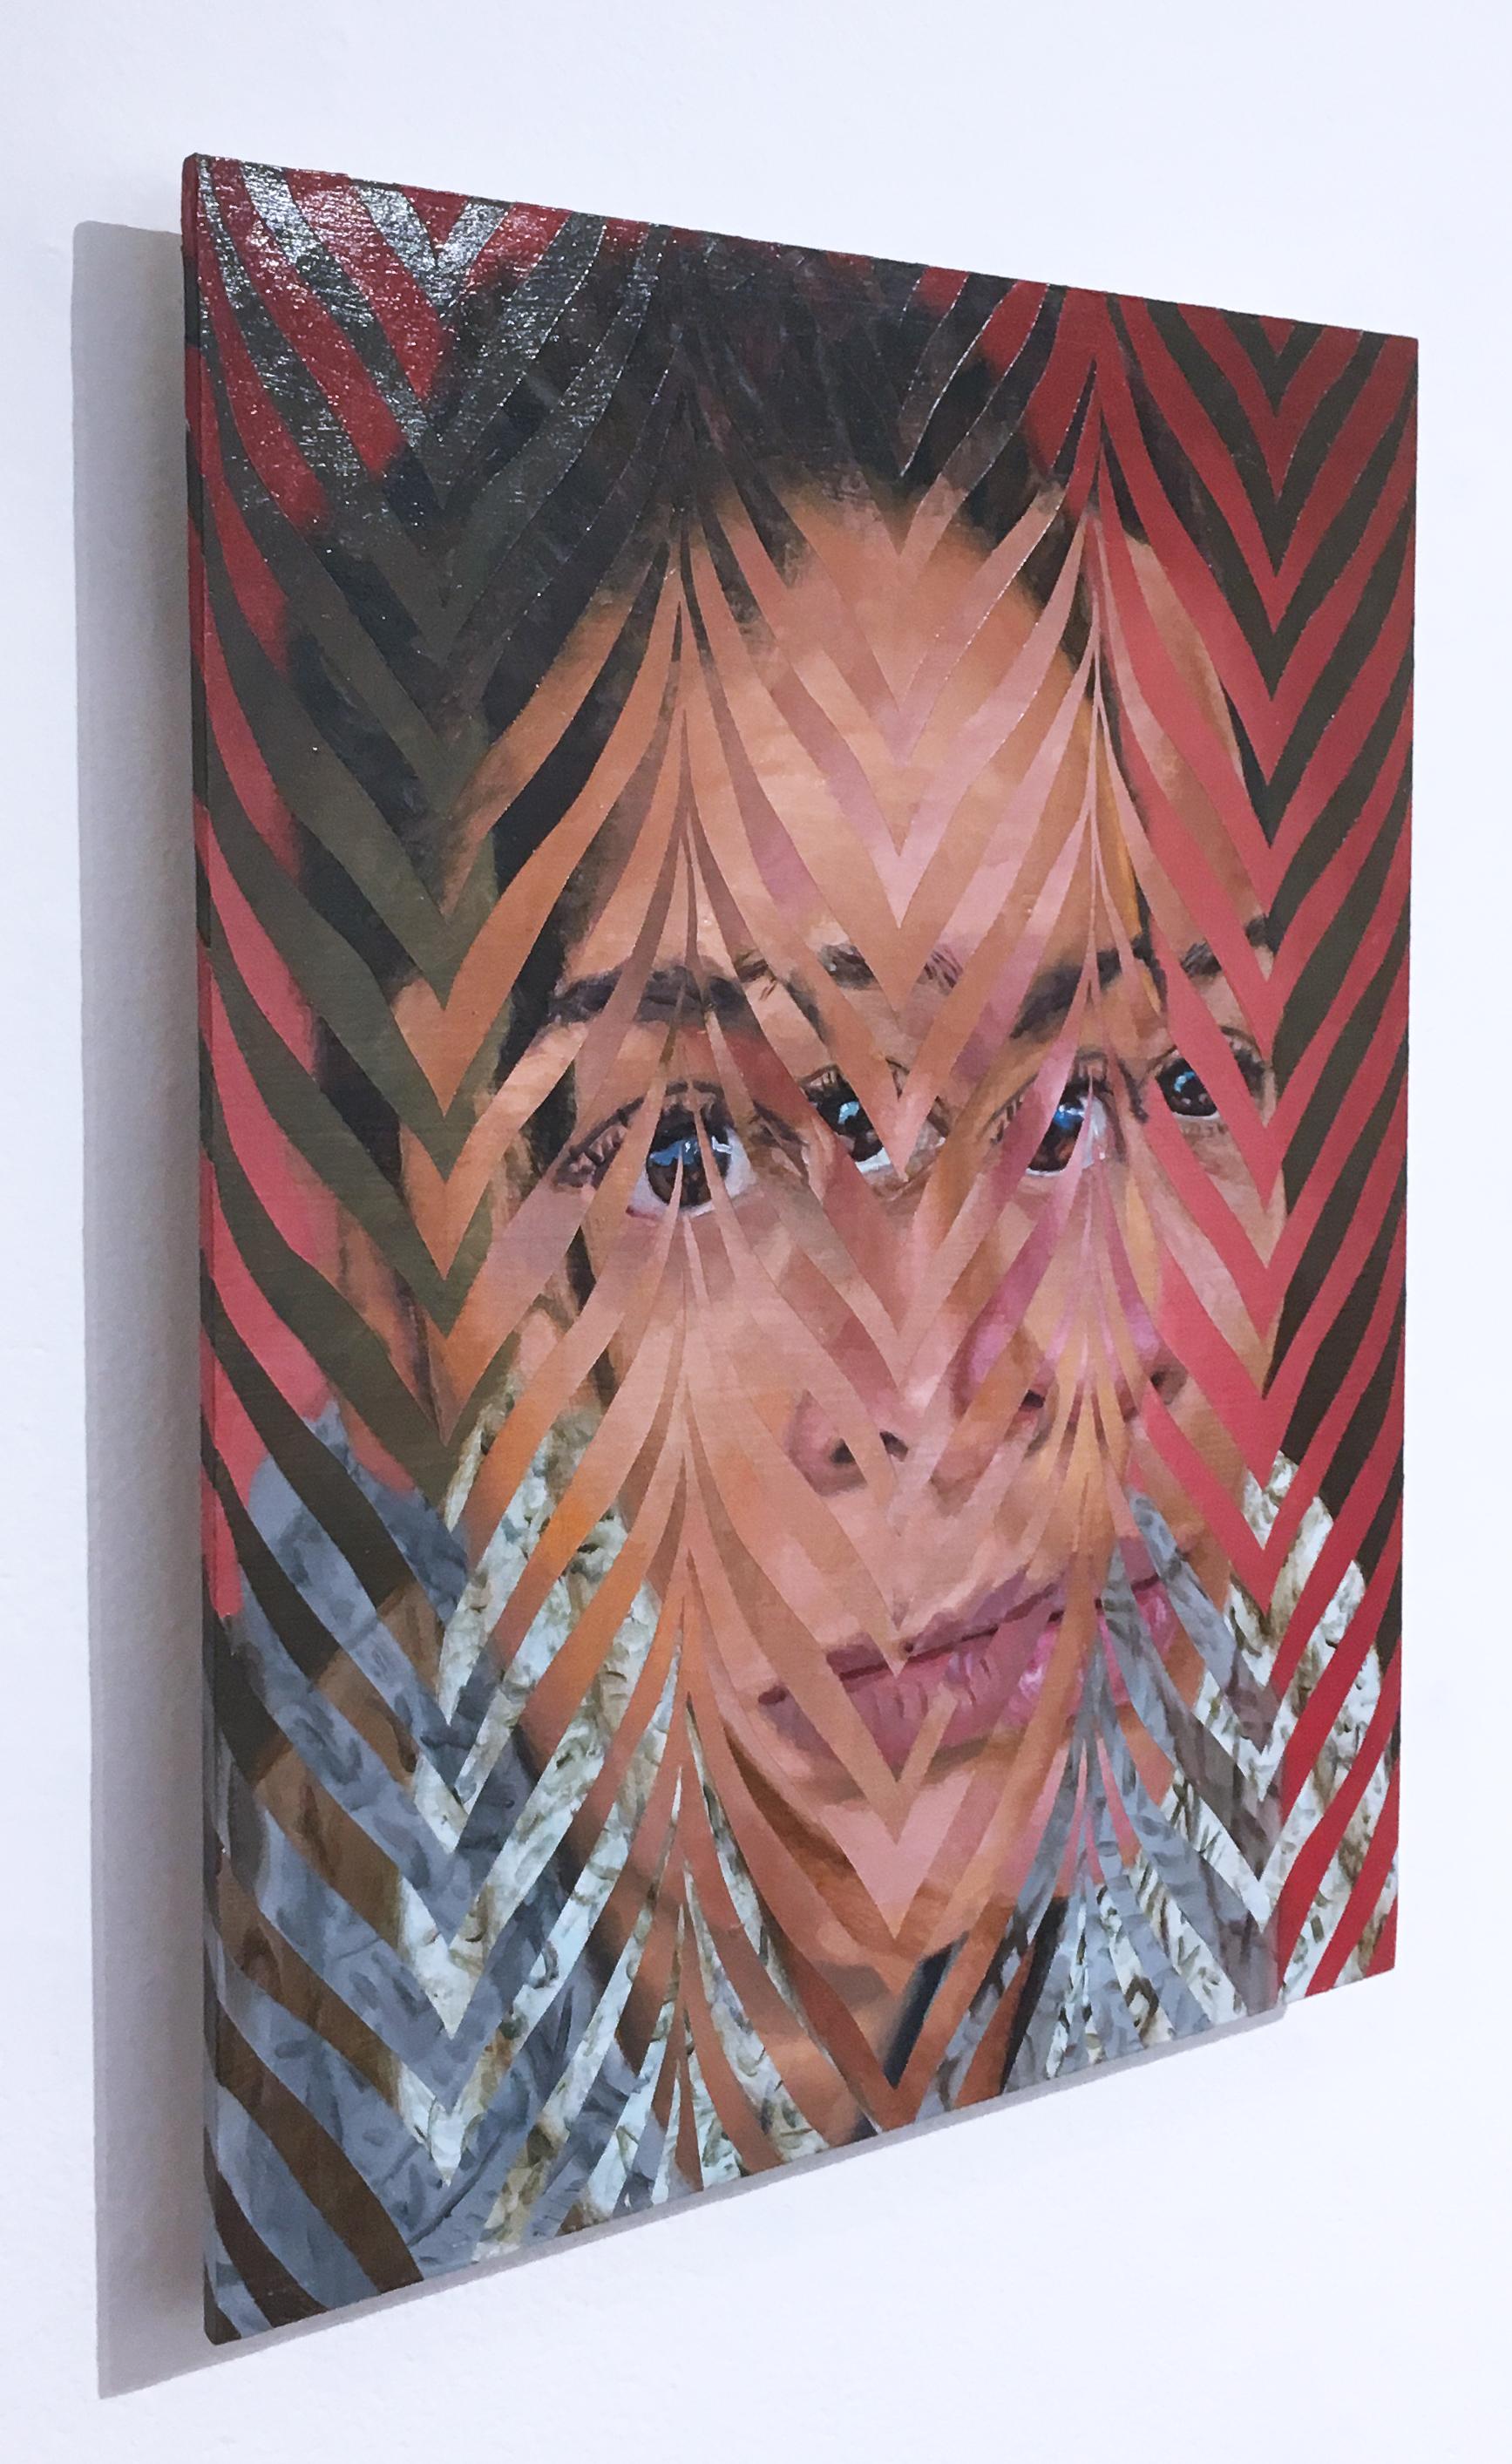 Tai by JAHRU
Oil and acrylic painting on masonite.  Portraiture with patterns and distortions by contemporary street artist JAHRU aka Jeff Huntington. Bright, saturated pinks, reds and blues with a range of earth tones. 